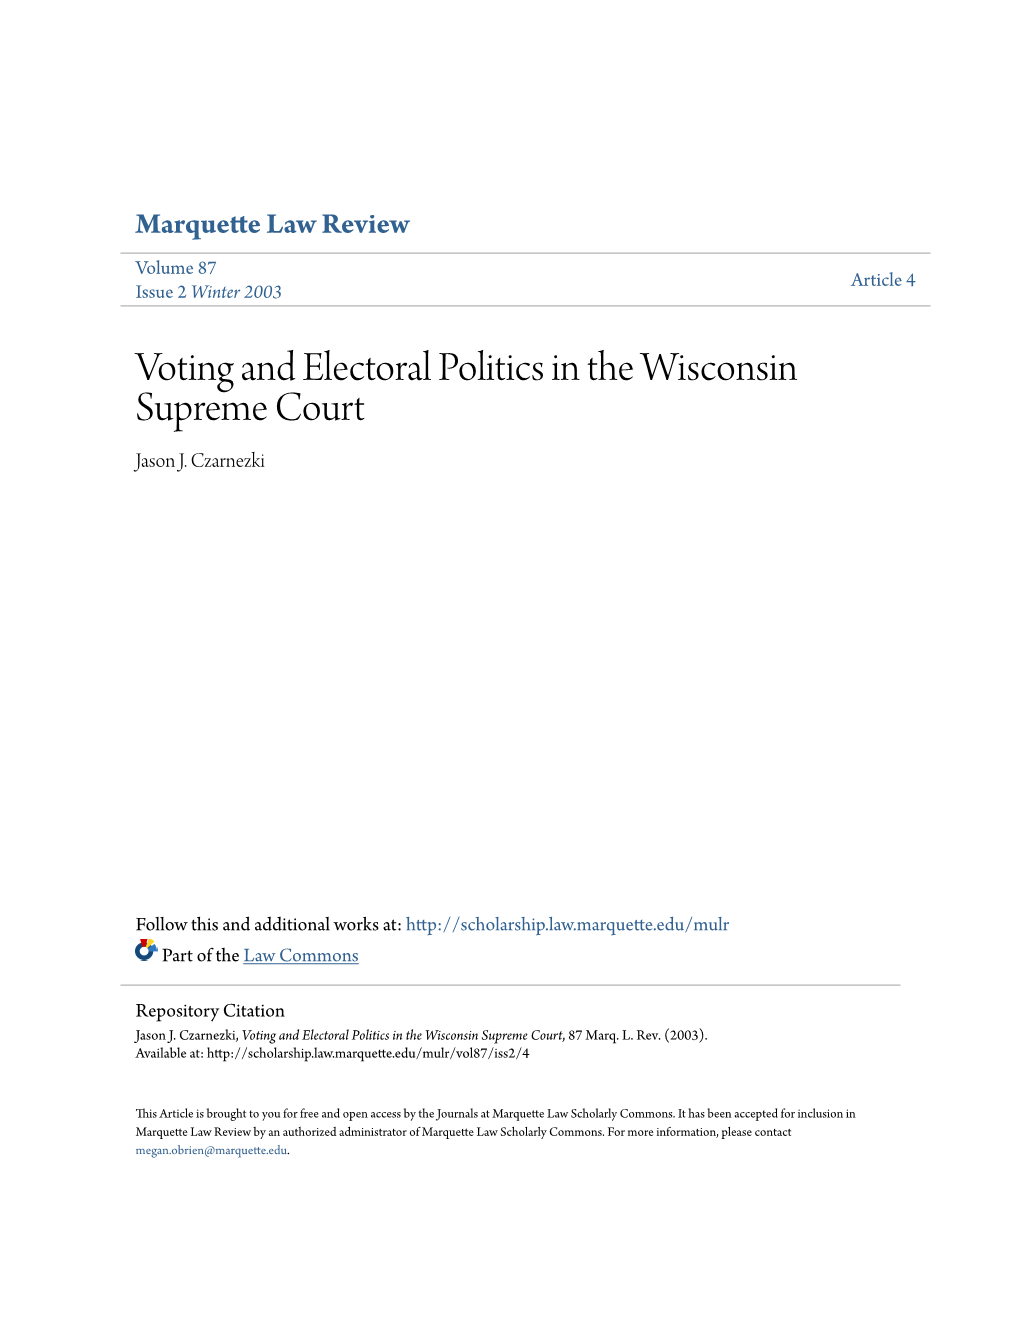 Voting and Electoral Politics in the Wisconsin Supreme Court Jason J